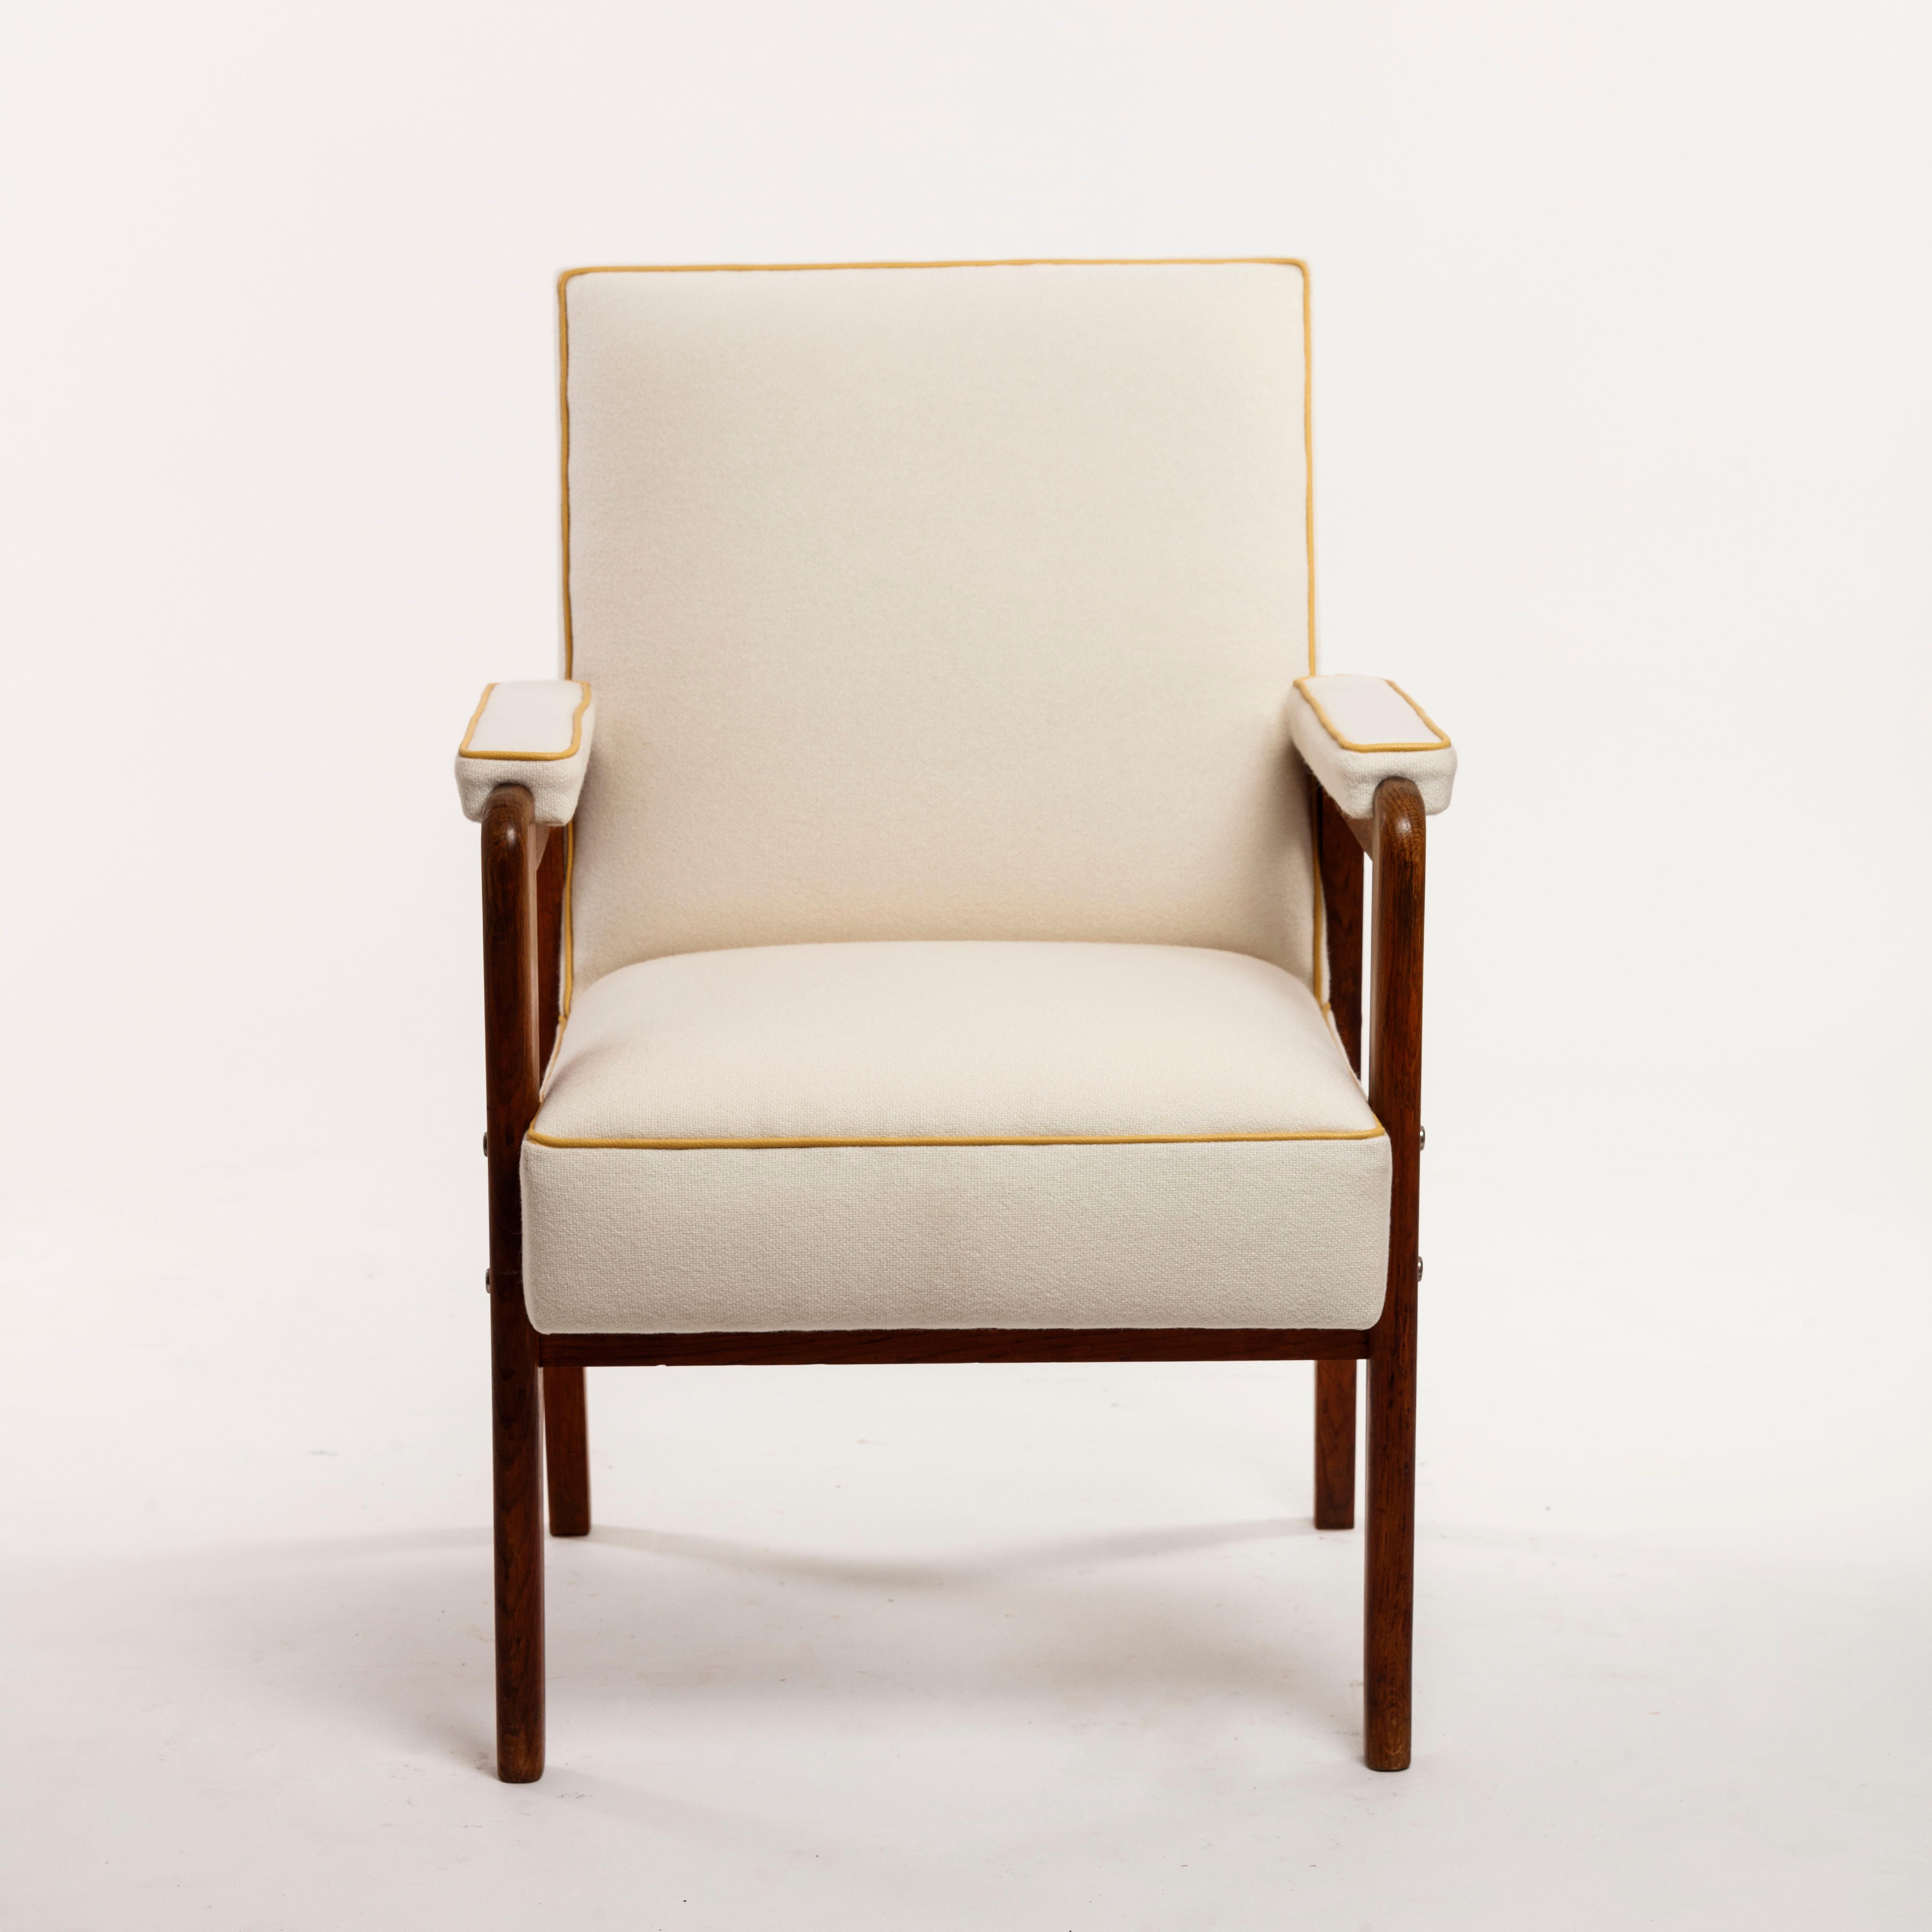 Fabric Marcel Gascoin Armchair Created in 1950 for the Cité Universitaire Antony France For Sale